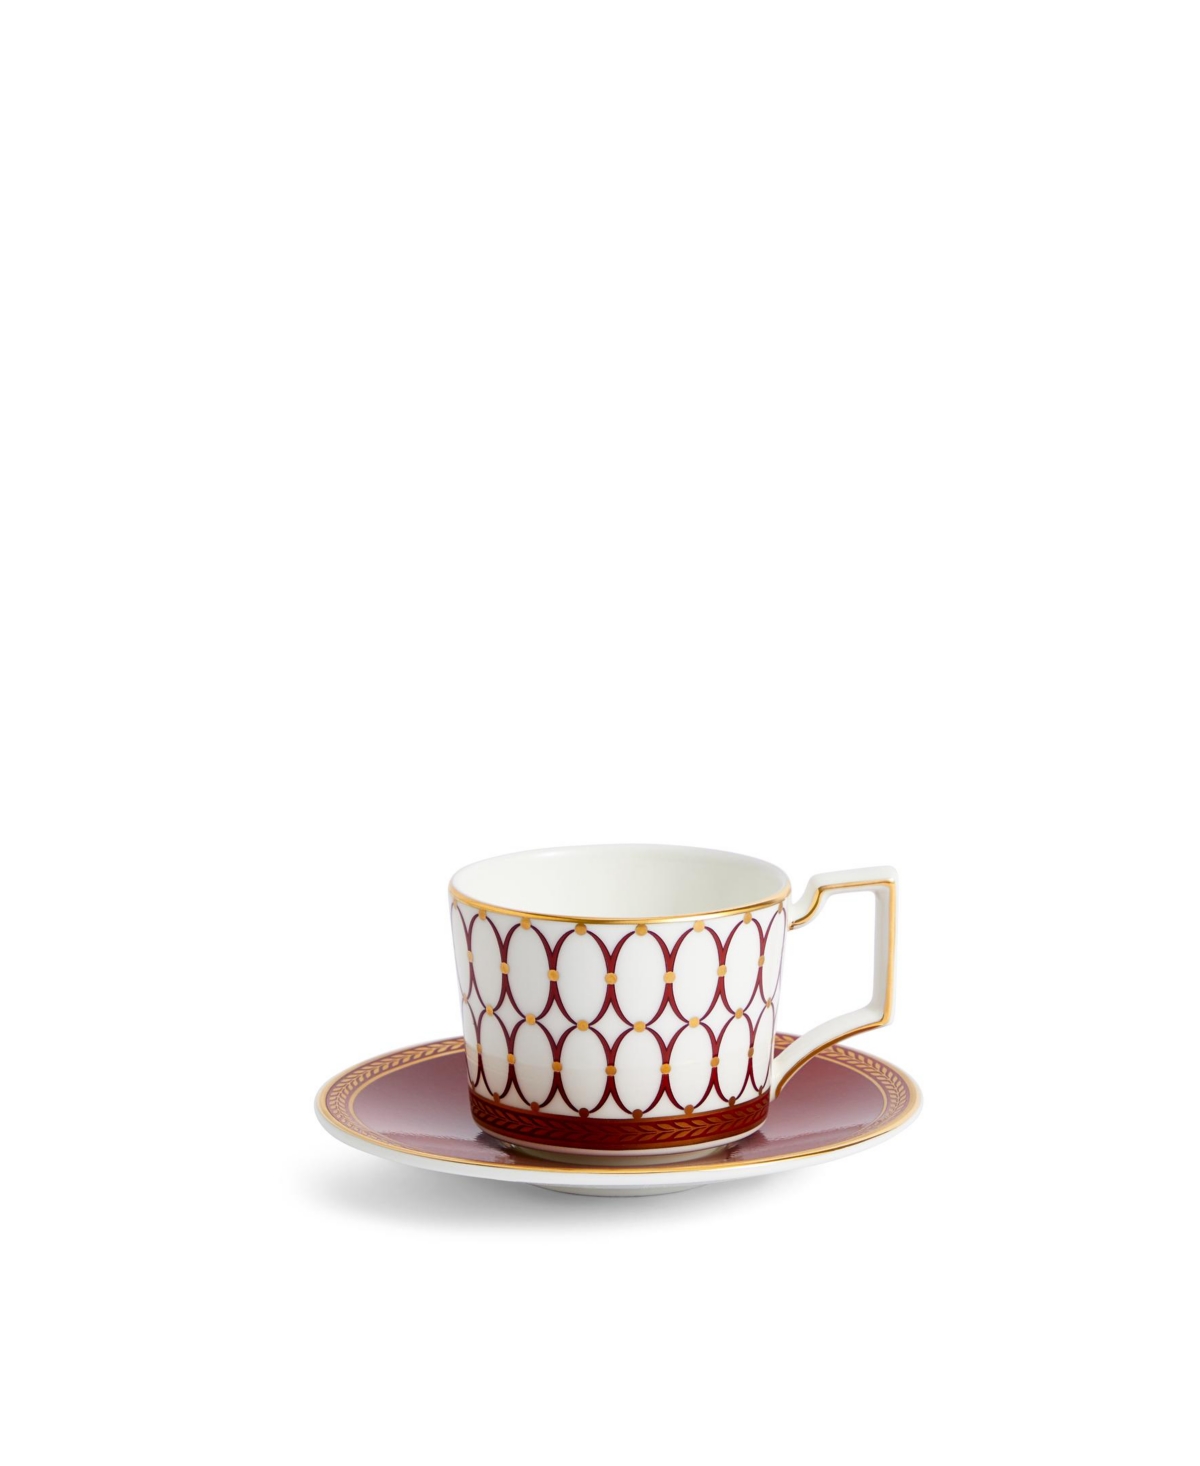 Wedgwood Renaissance Red China Coffee Cup And Saucer